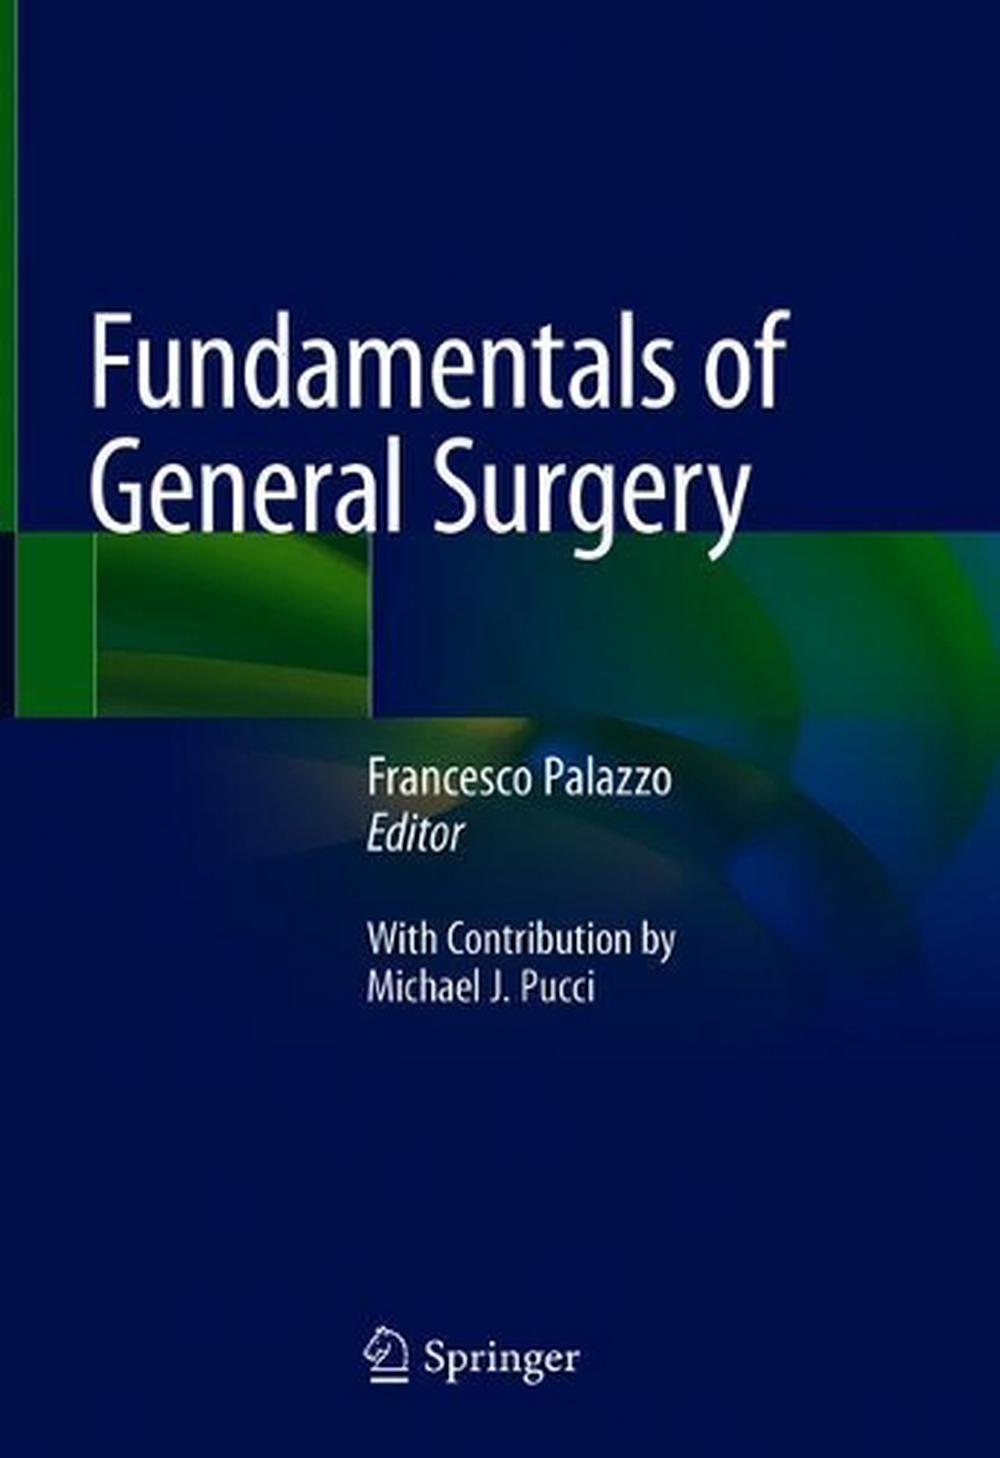 general surgery thesis topics